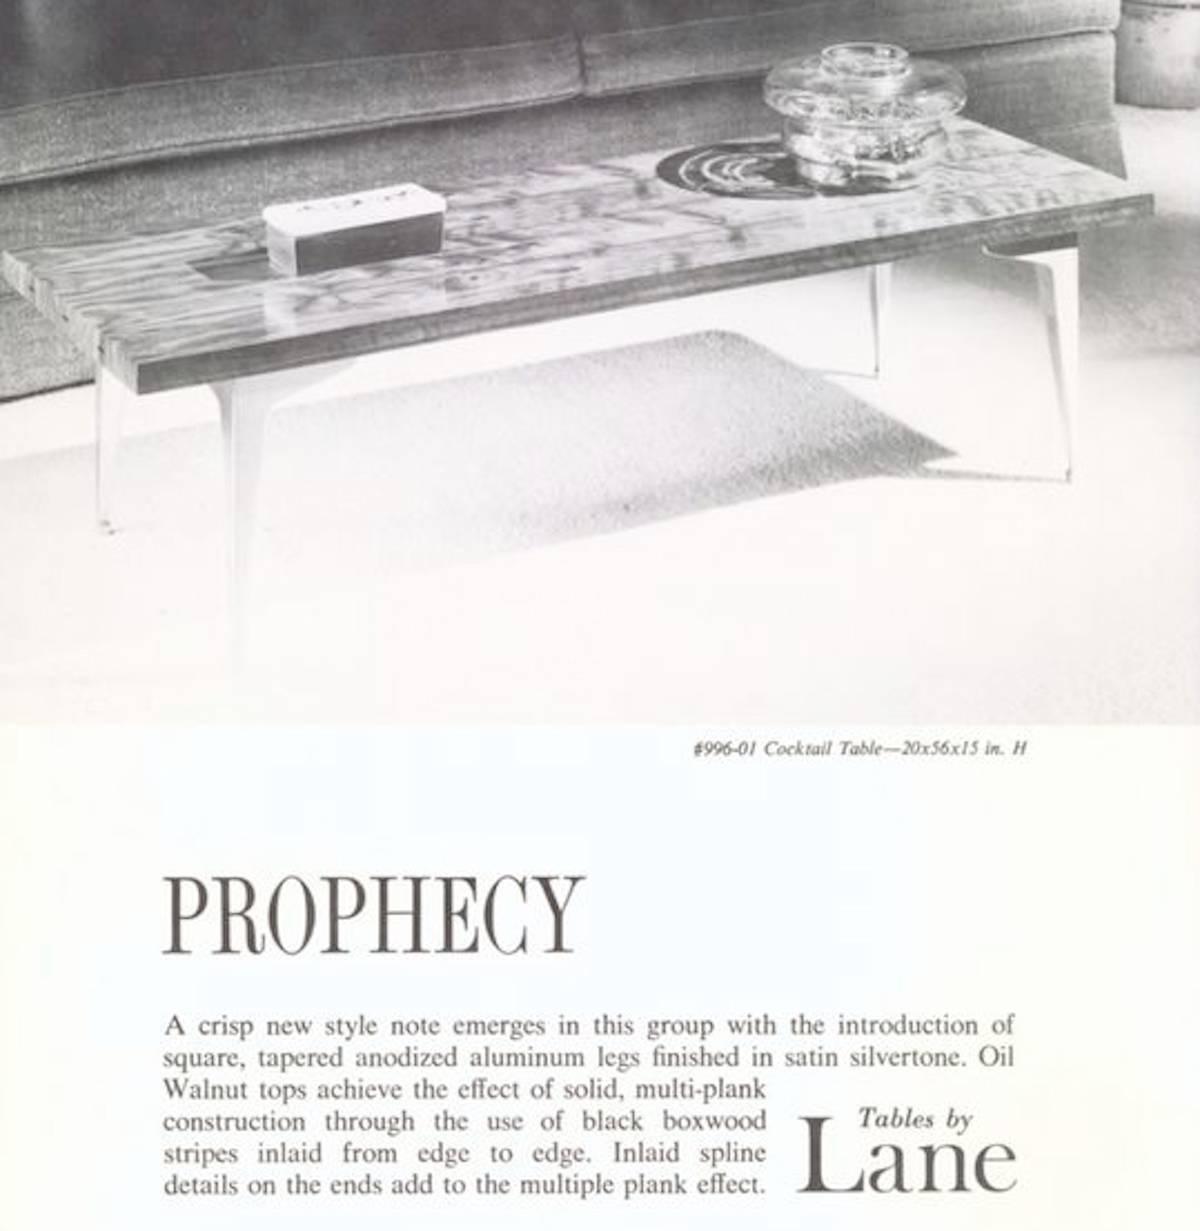 Very Rare Cocktail Table by Lane the Prophecy Series Aluminum and Walnut 3